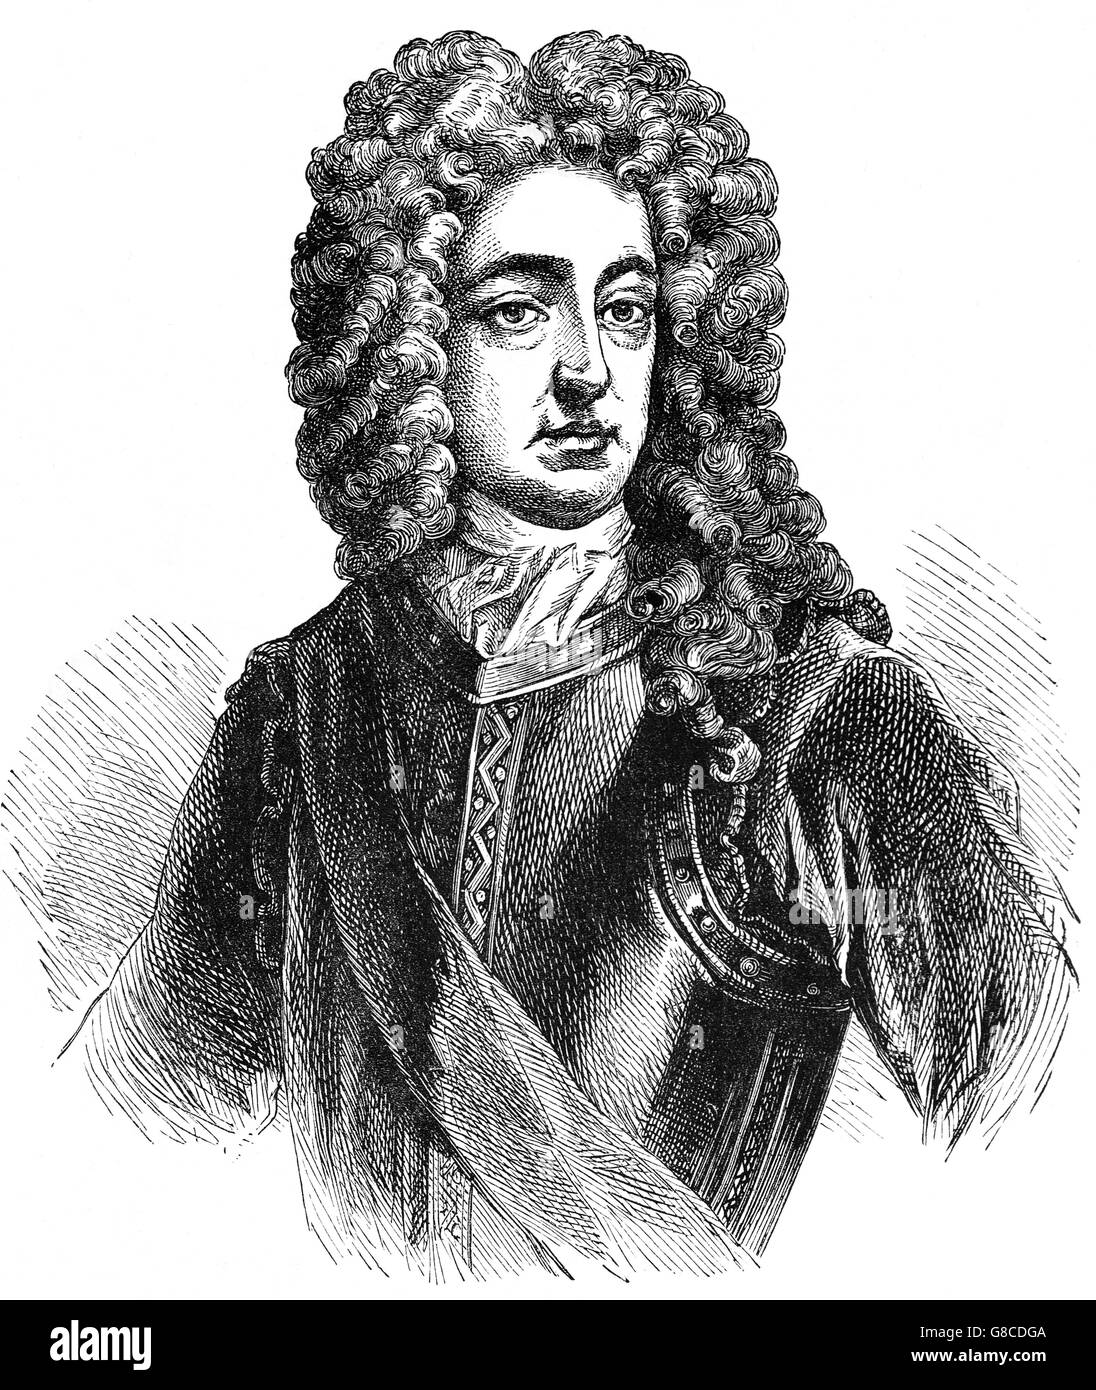 James Francis Edward, Prince of Wales (1688 – 1766), nicknamed the Old Pretender, was the son of the deposed James II of England and Ireland, VII of Scotland.  He claimed the English, Scottish and Irish thrones when he was recognised as king of England, Scotland  and Ireland by his cousin Louis XIV of France Stock Photo